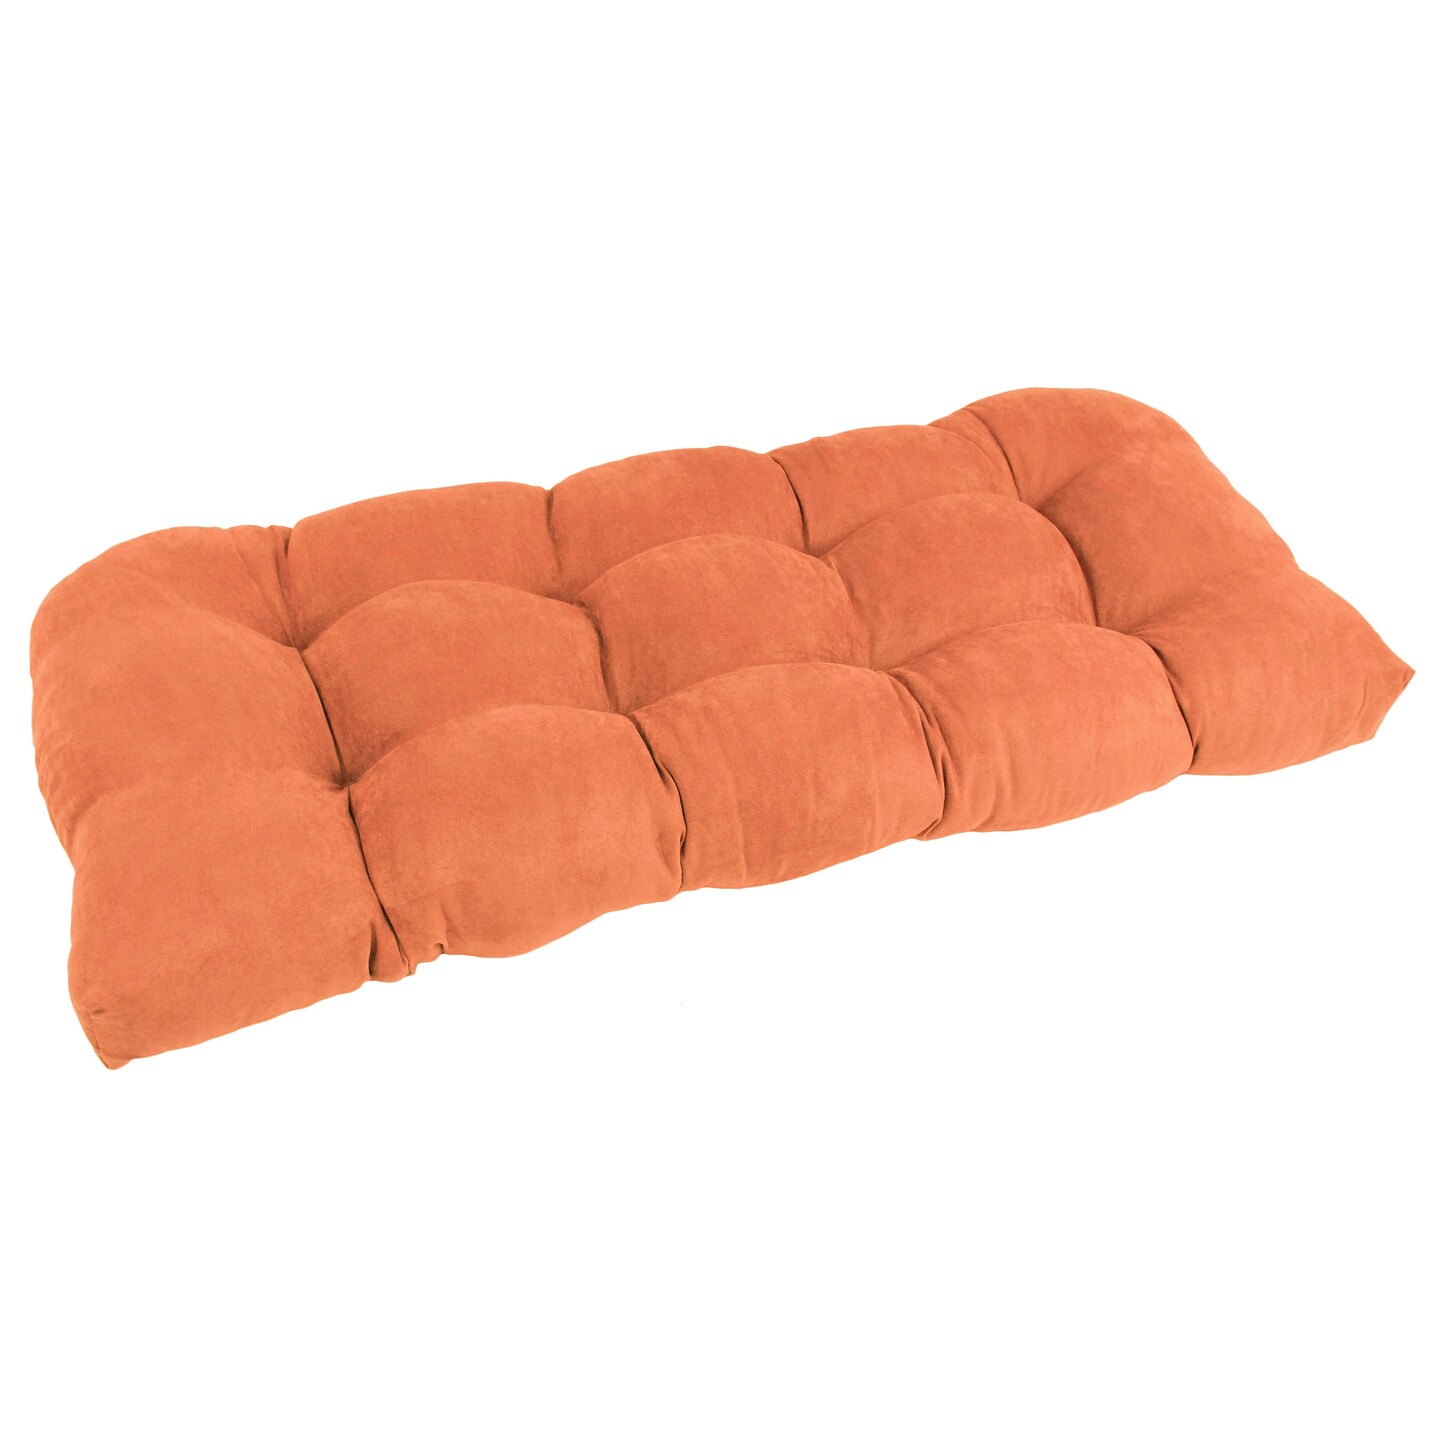 42-inch by 19-inch U-Shaped Micro Suede Polyester Tufted Settee/Bench Cushion - Tangerine Dream